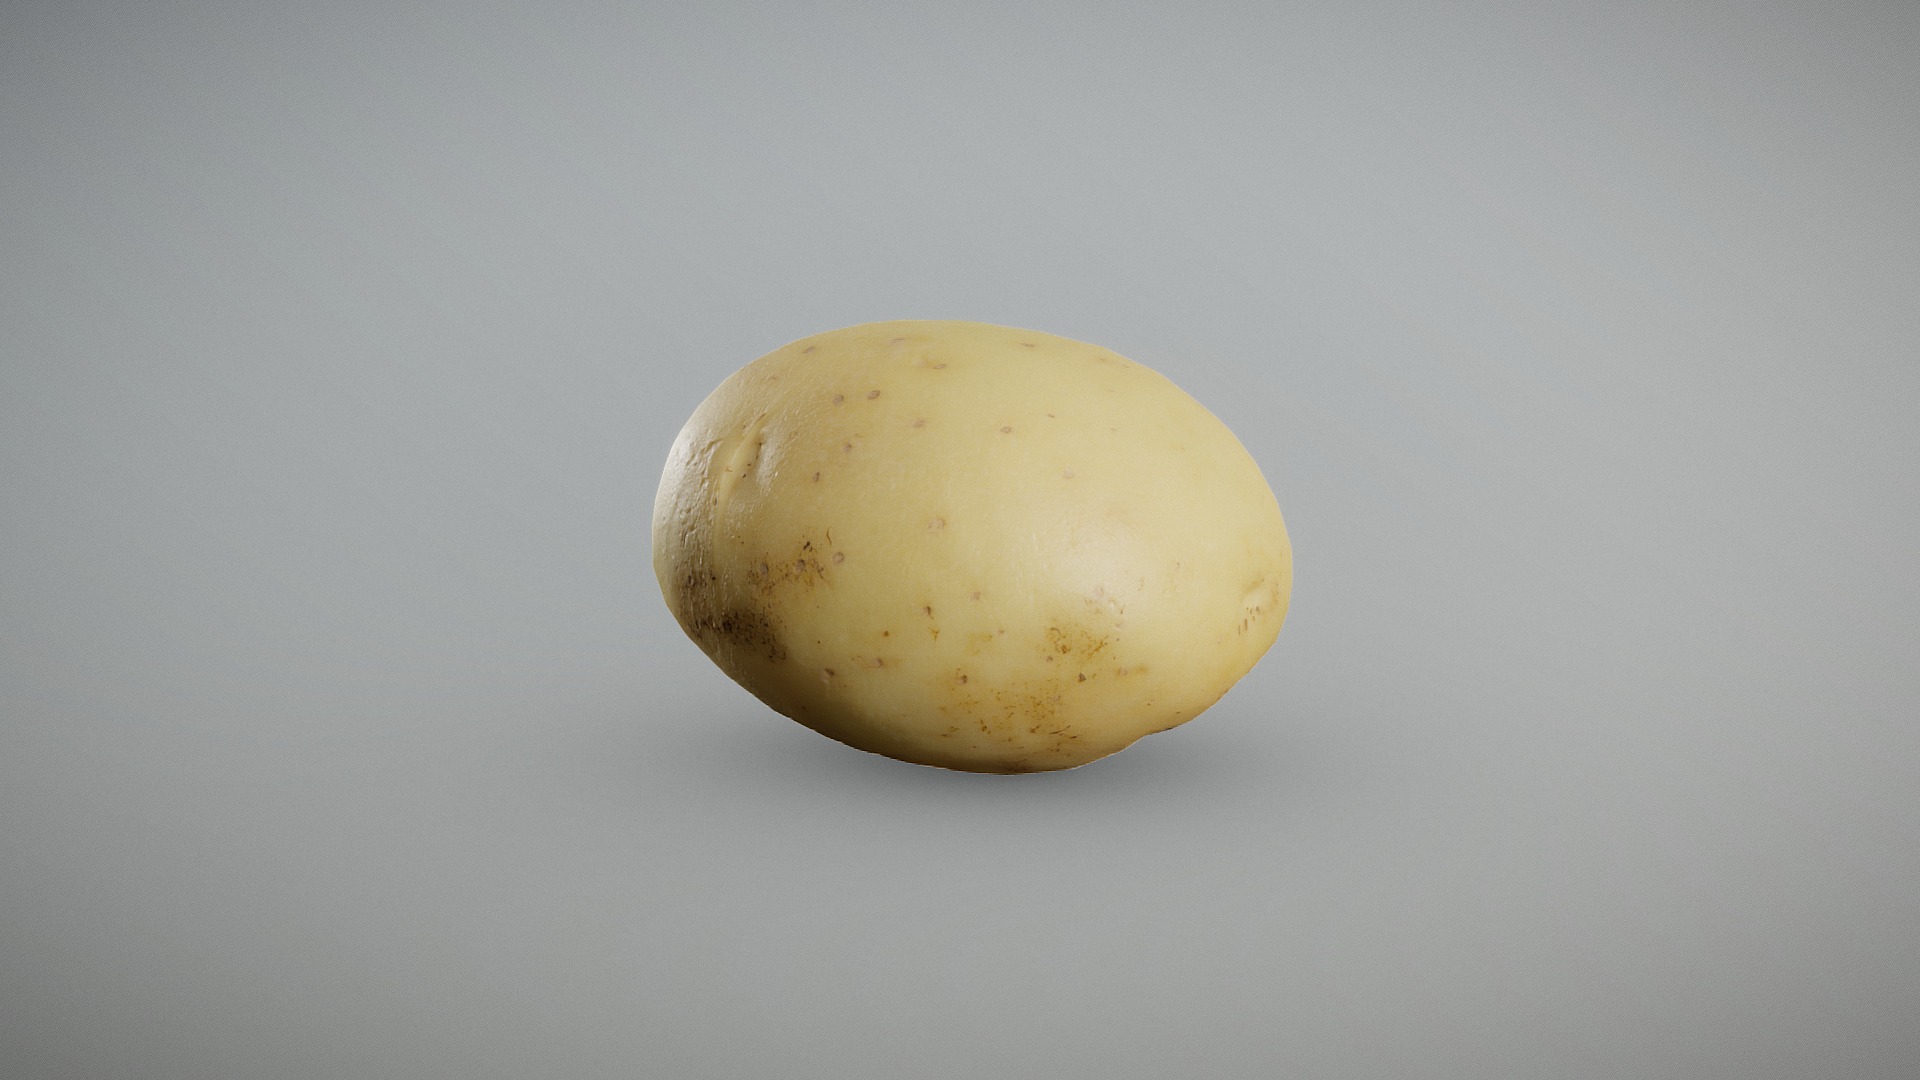 3D model White Potato - This is a 3D model of the White Potato. The 3D model is about a yellow potato on a white surface.